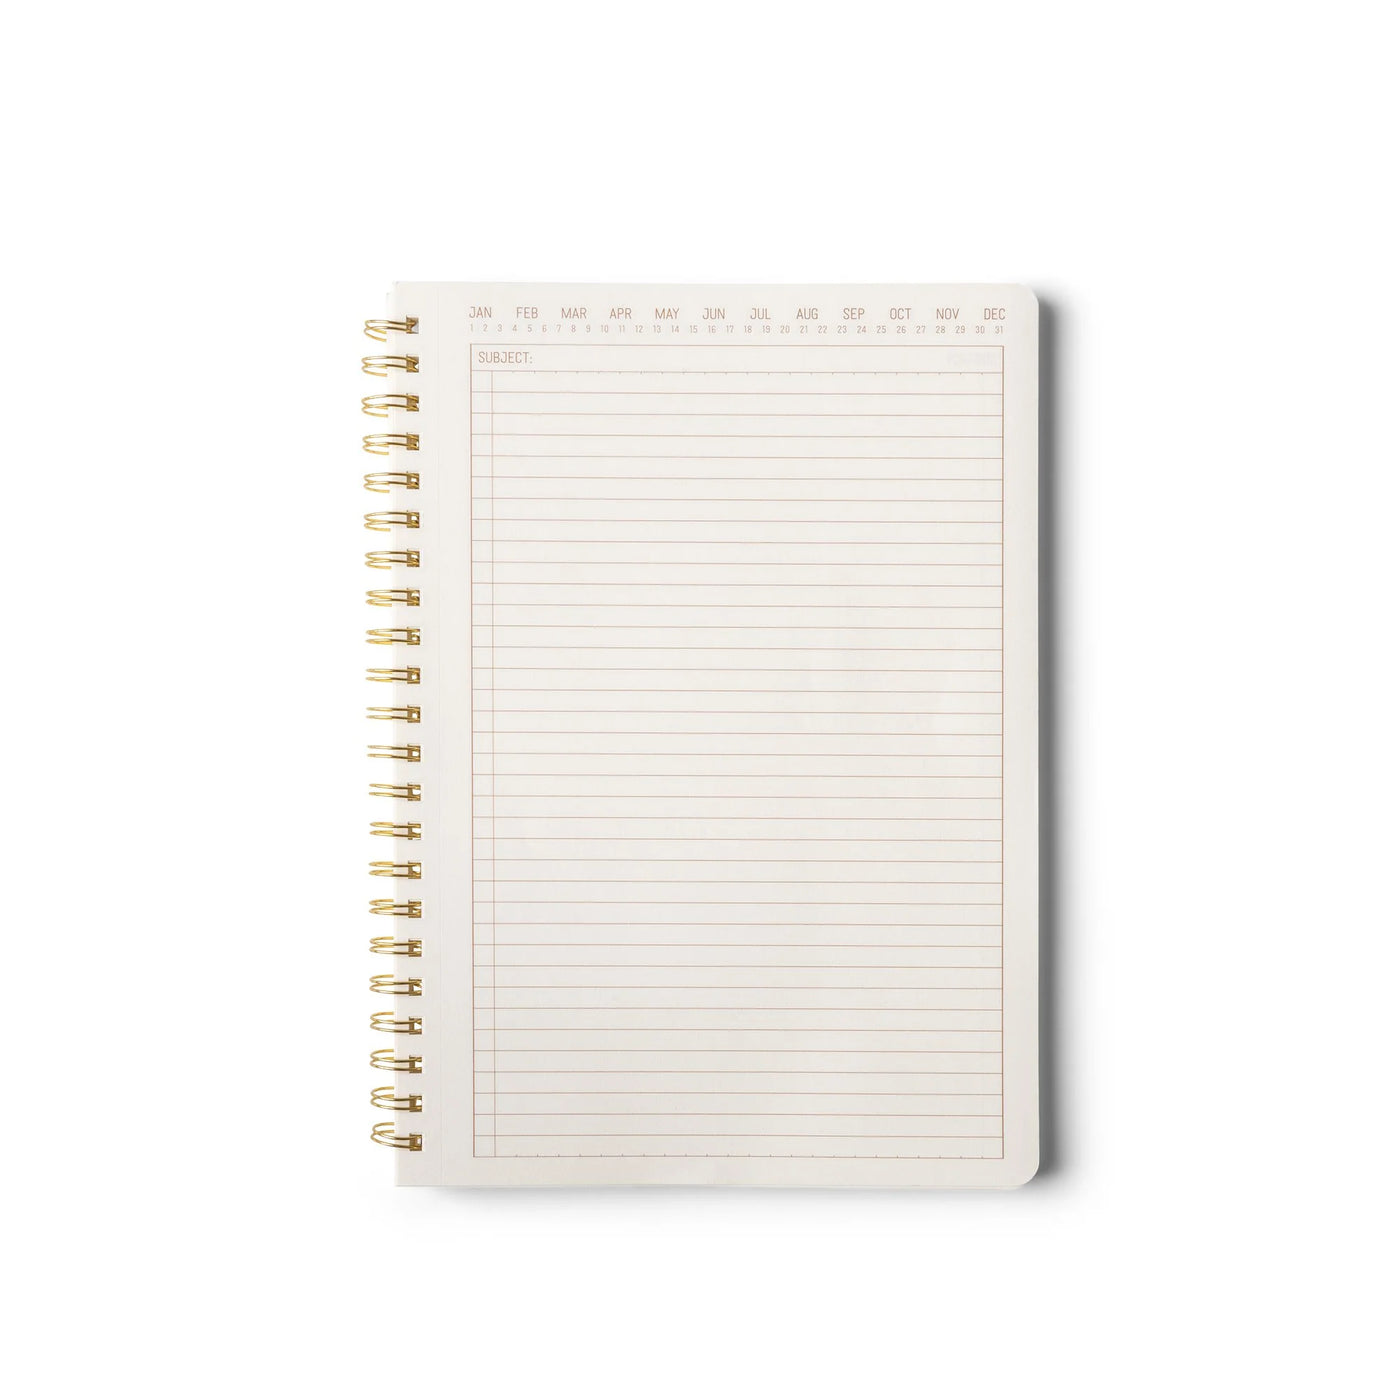 Textured Paper Twin Wire Notebook - Large Blue